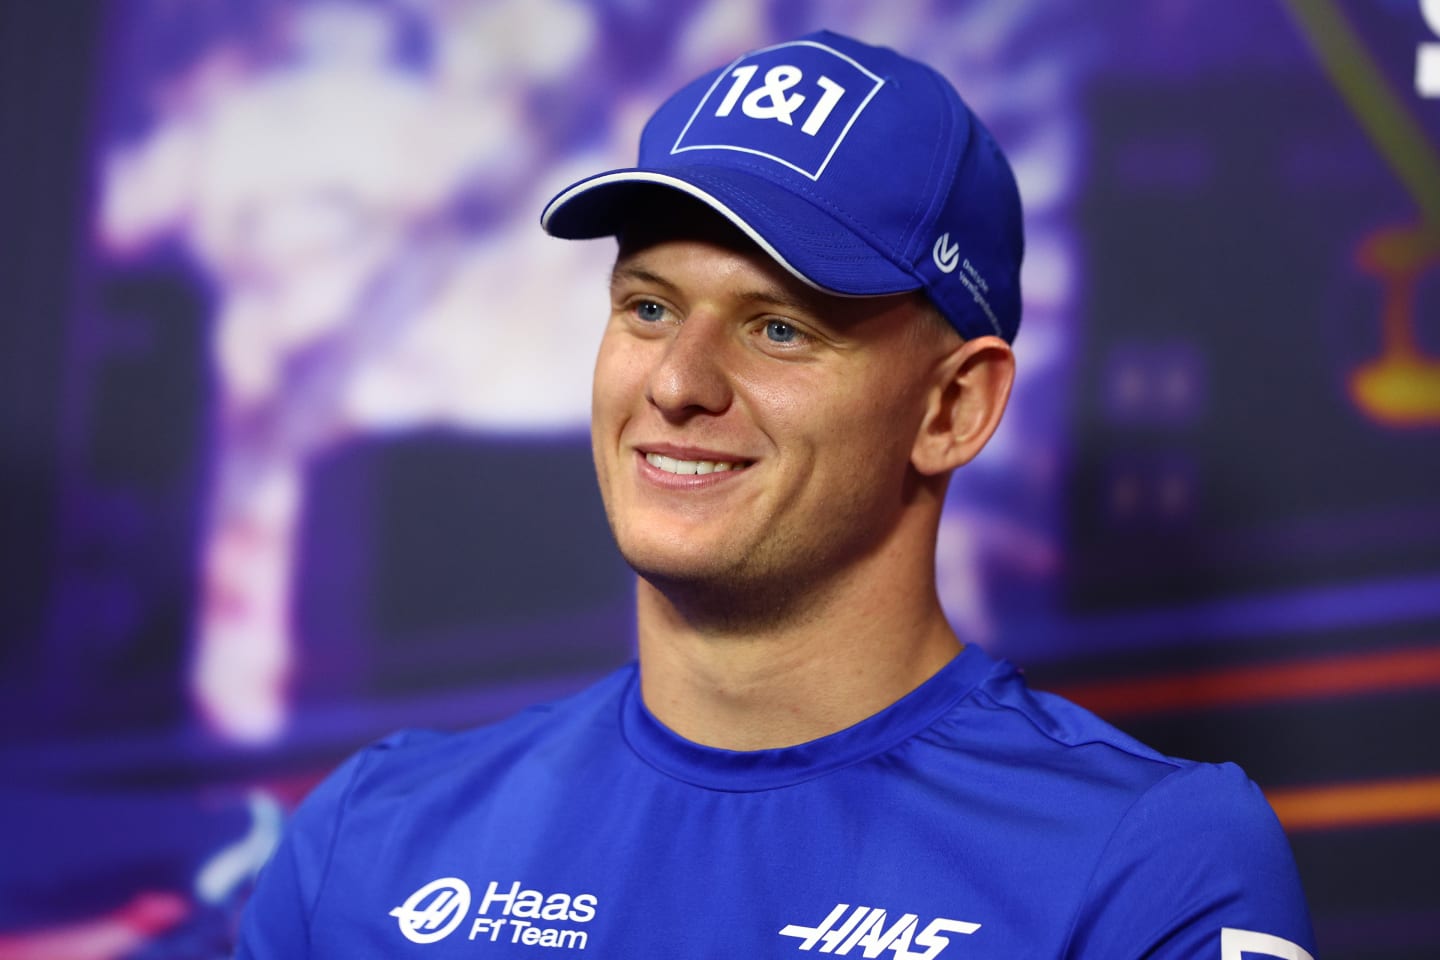 SINGAPORE, SINGAPORE - SEPTEMBER 29: Mick Schumacher of Germany and Haas F1 attends the Drivers Press Conference during previews ahead of the F1 Grand Prix of Singapore at Marina Bay Street Circuit on September 29, 2022 in Singapore, Singapore. (Photo by Clive Rose/Getty Images,)